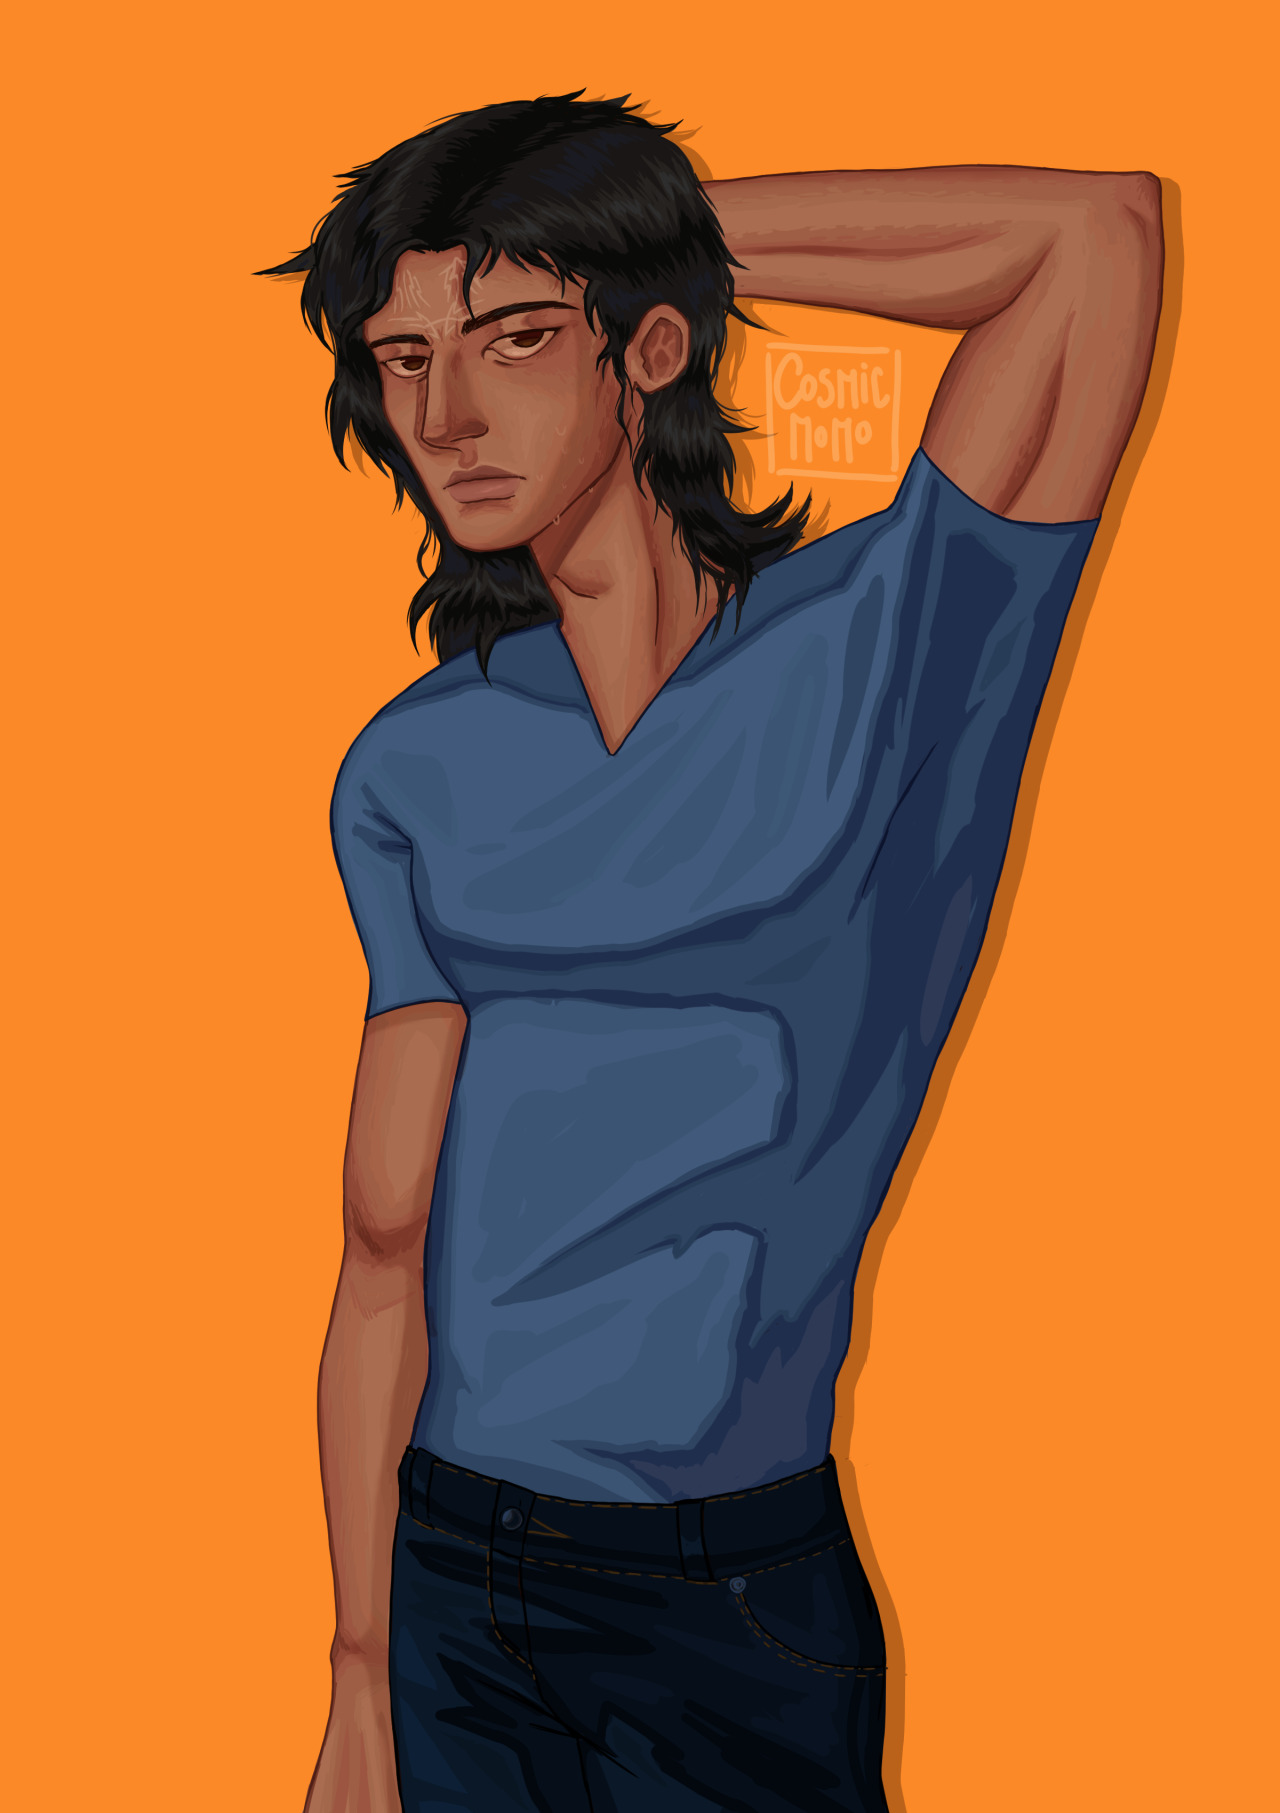 Kaladin with a mullet,,, that’s it #cosmere#kaladin stormblessed#stormlight archive #the stormlight archive #stormlight fanart#my art#brandon sanderson #the way of kings